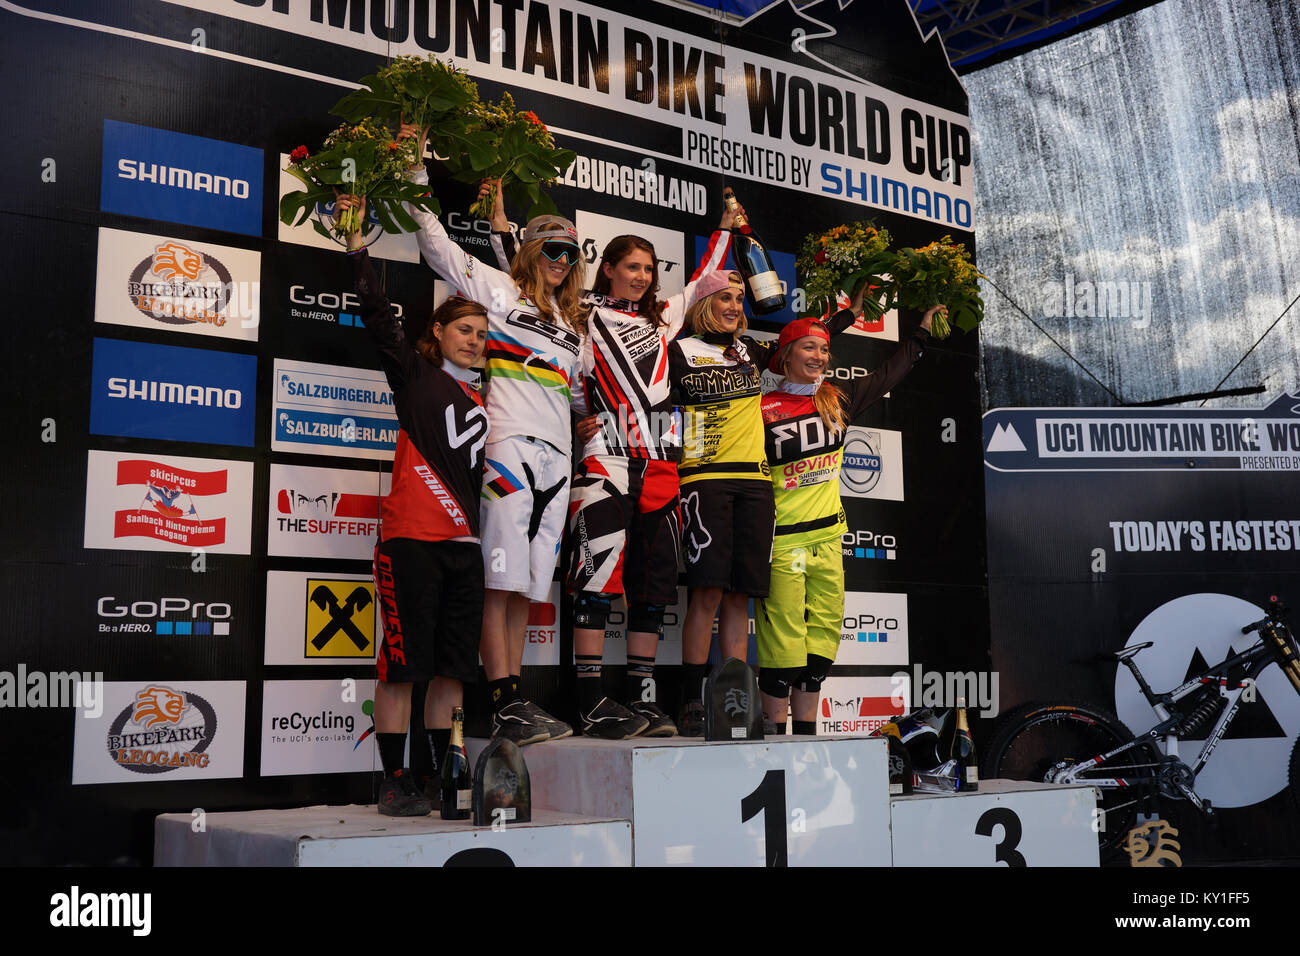 Mountain bikers Manon Carpenter (C) from Madison Saracen Factory Team on the podium with Myriam Nicole (R) from Commencal/Riding Addiction and Rachel Atherton (L) from GT Factory Racing. Gonzales Photo/Christoph Obeschneider. Stock Photo